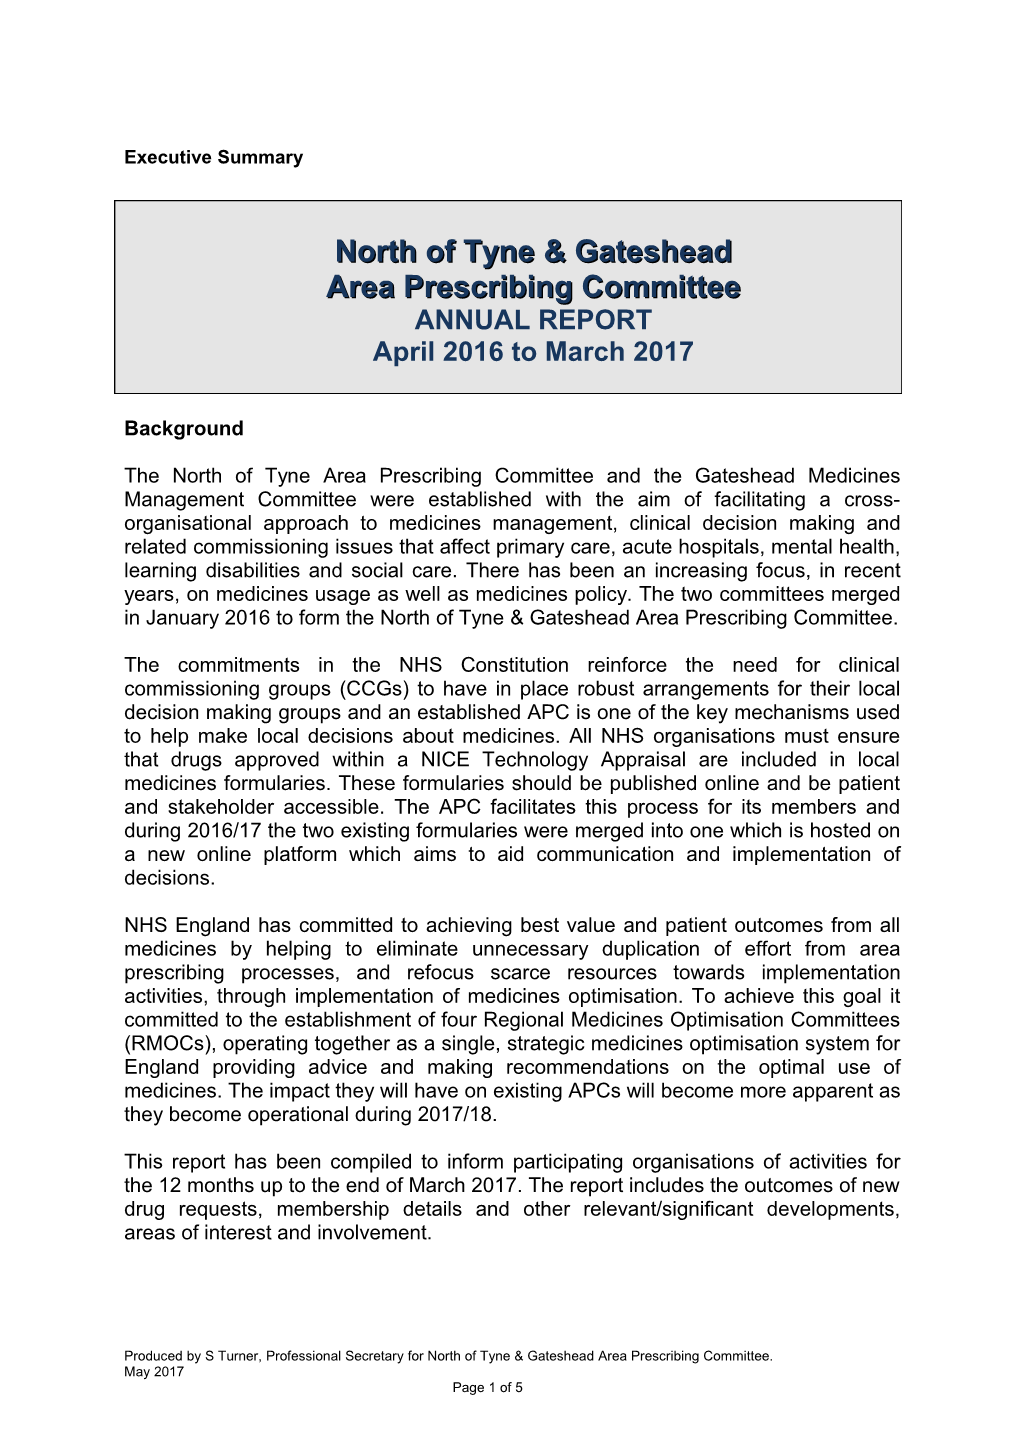 Notes from the Northumberland & North Tyneside Drug and Therapeutics Committee